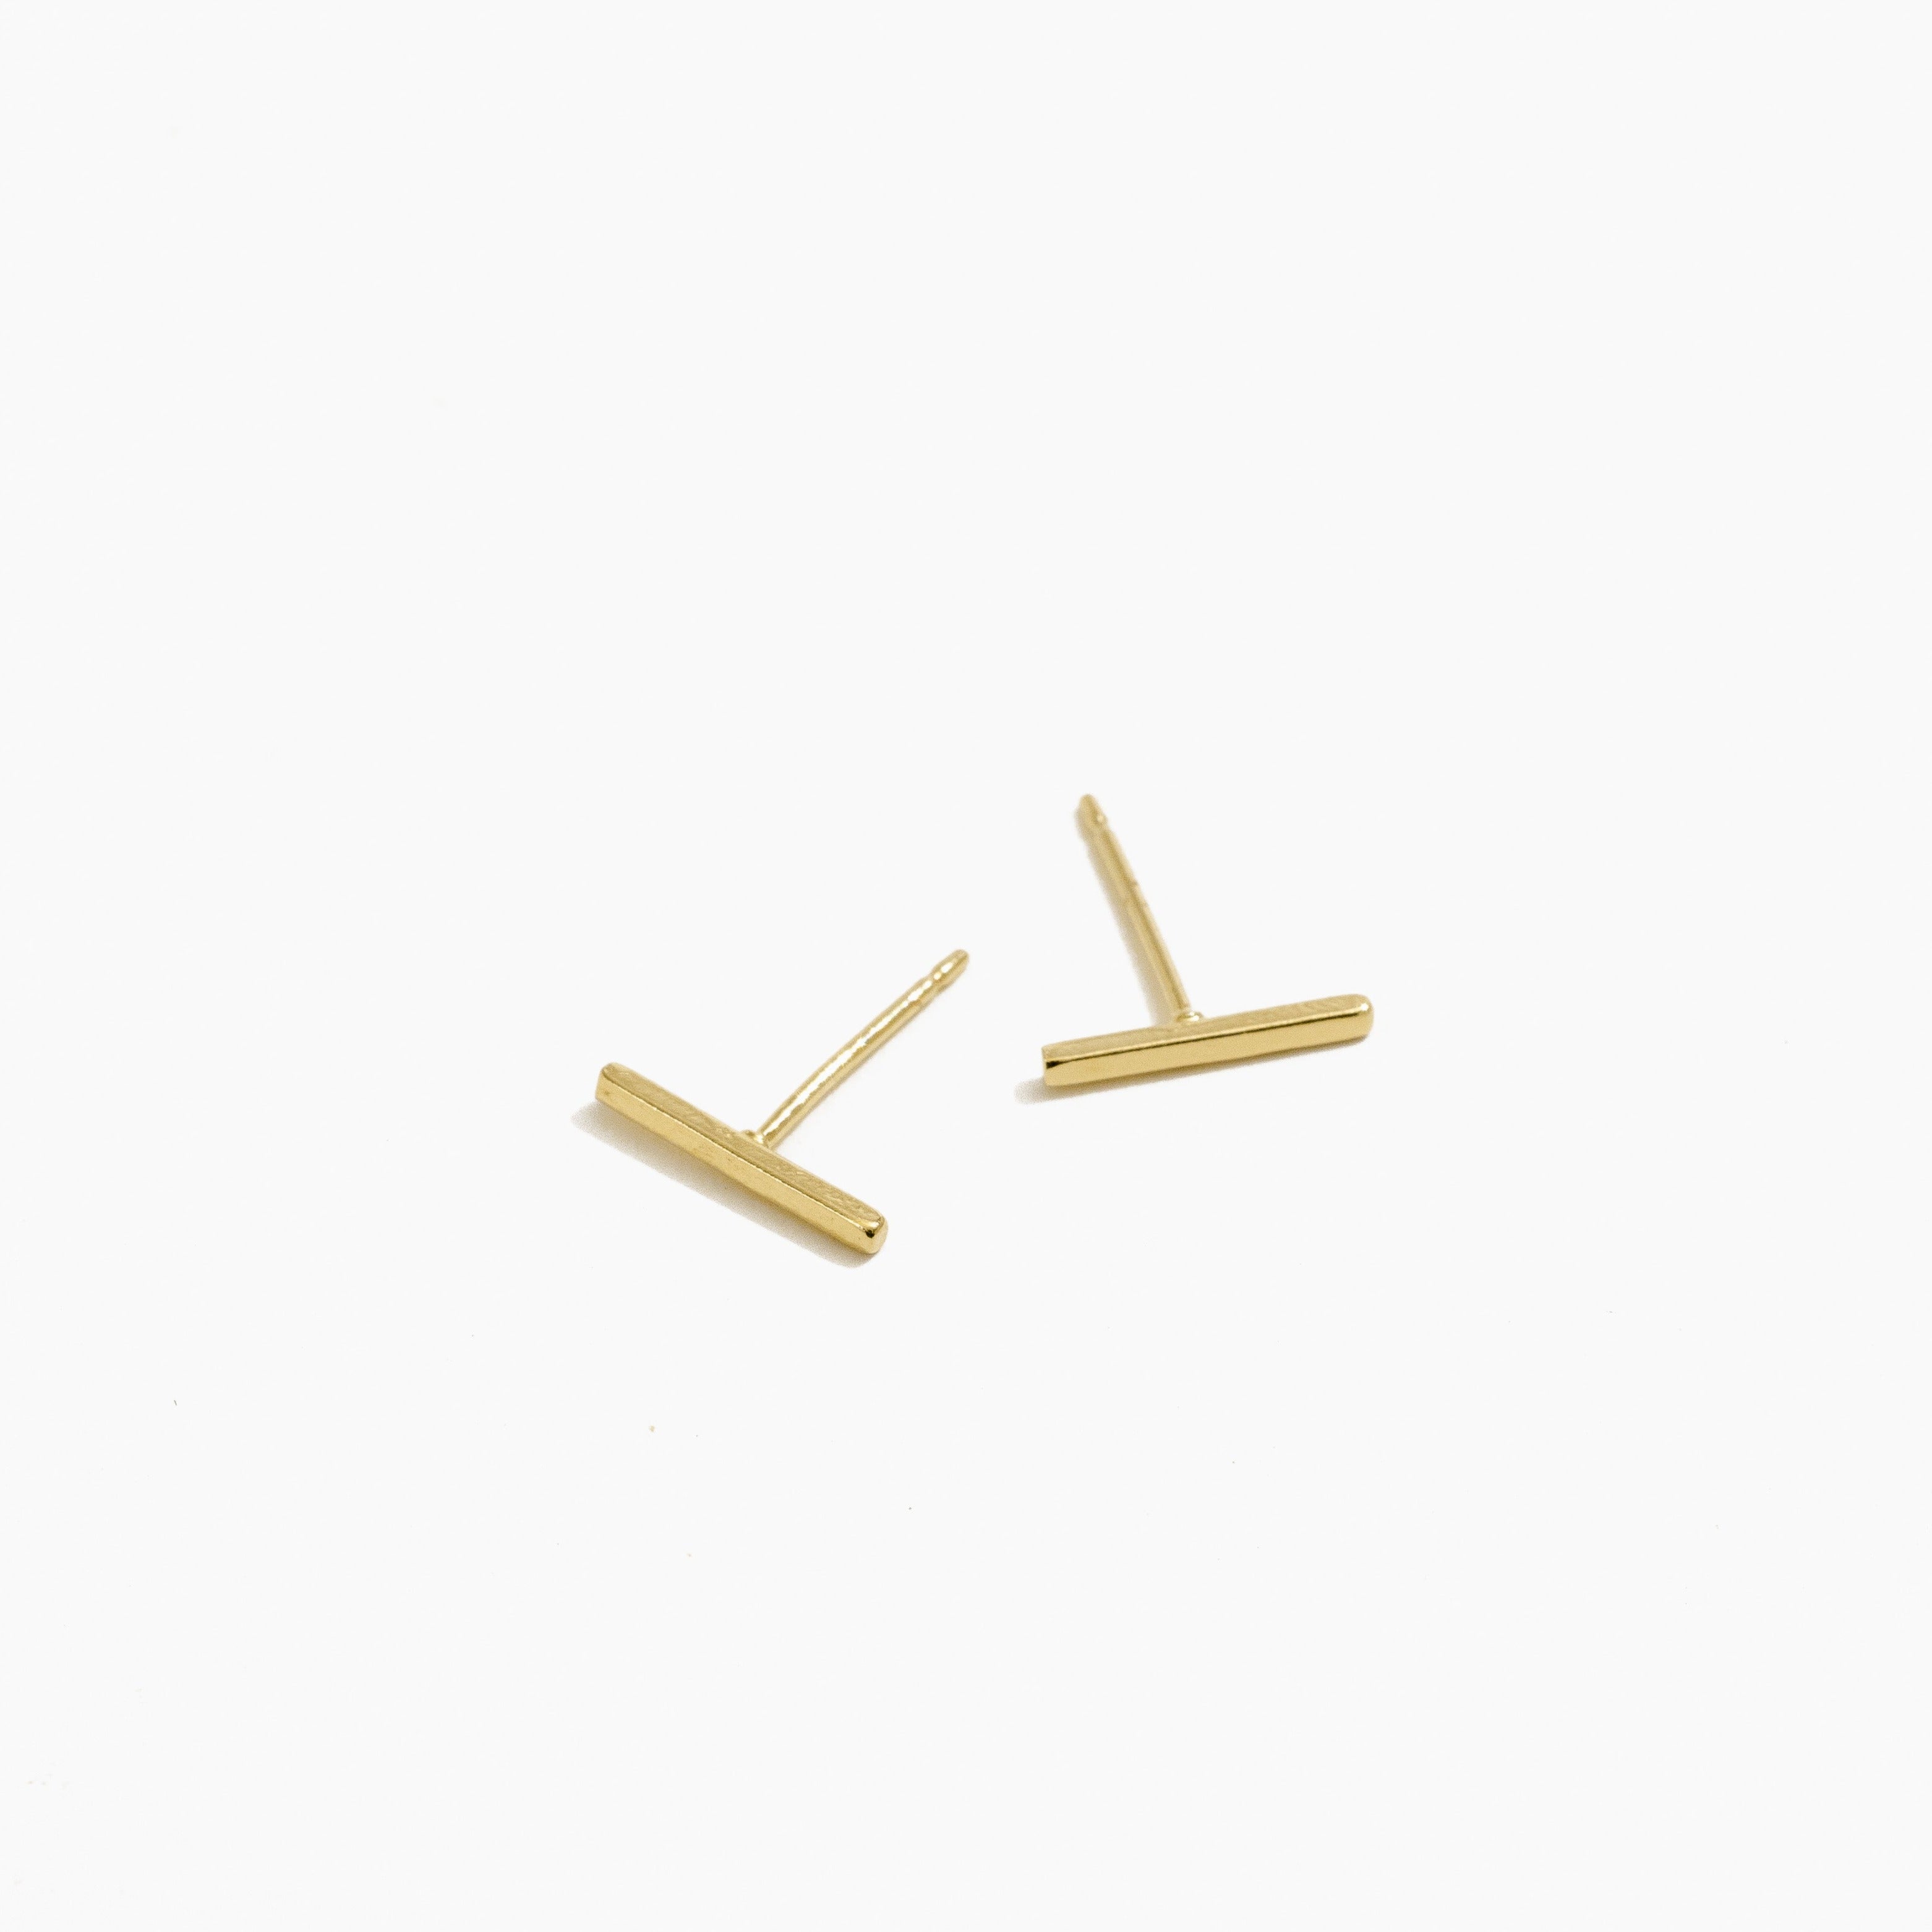 Solid Gold Bar Studs by Katie Dean Jewelry, made in America